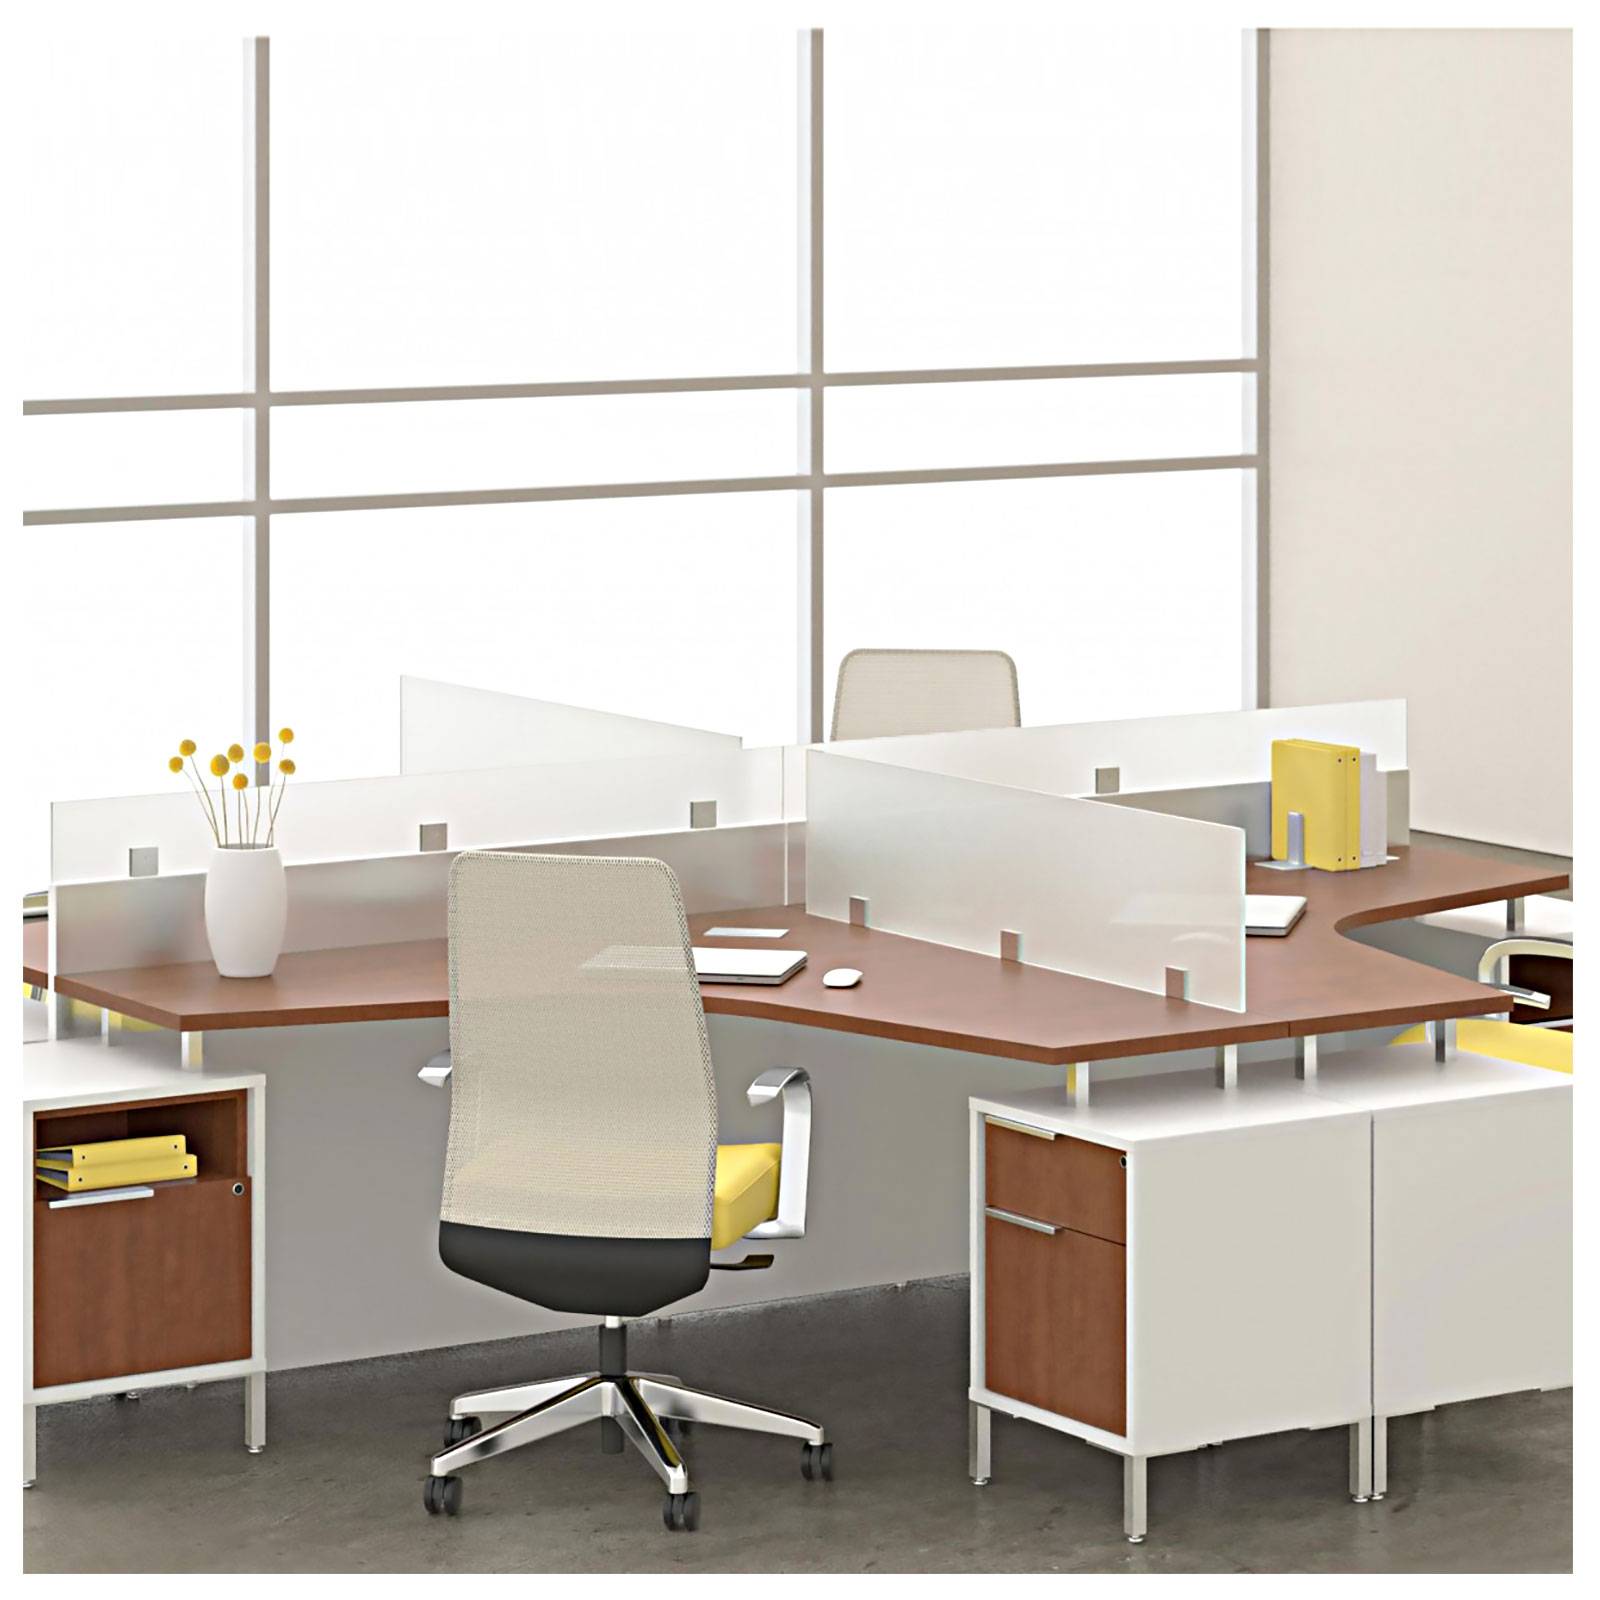 Deskmakers-TeamWorx series workstations are a versatile option when planning an office.